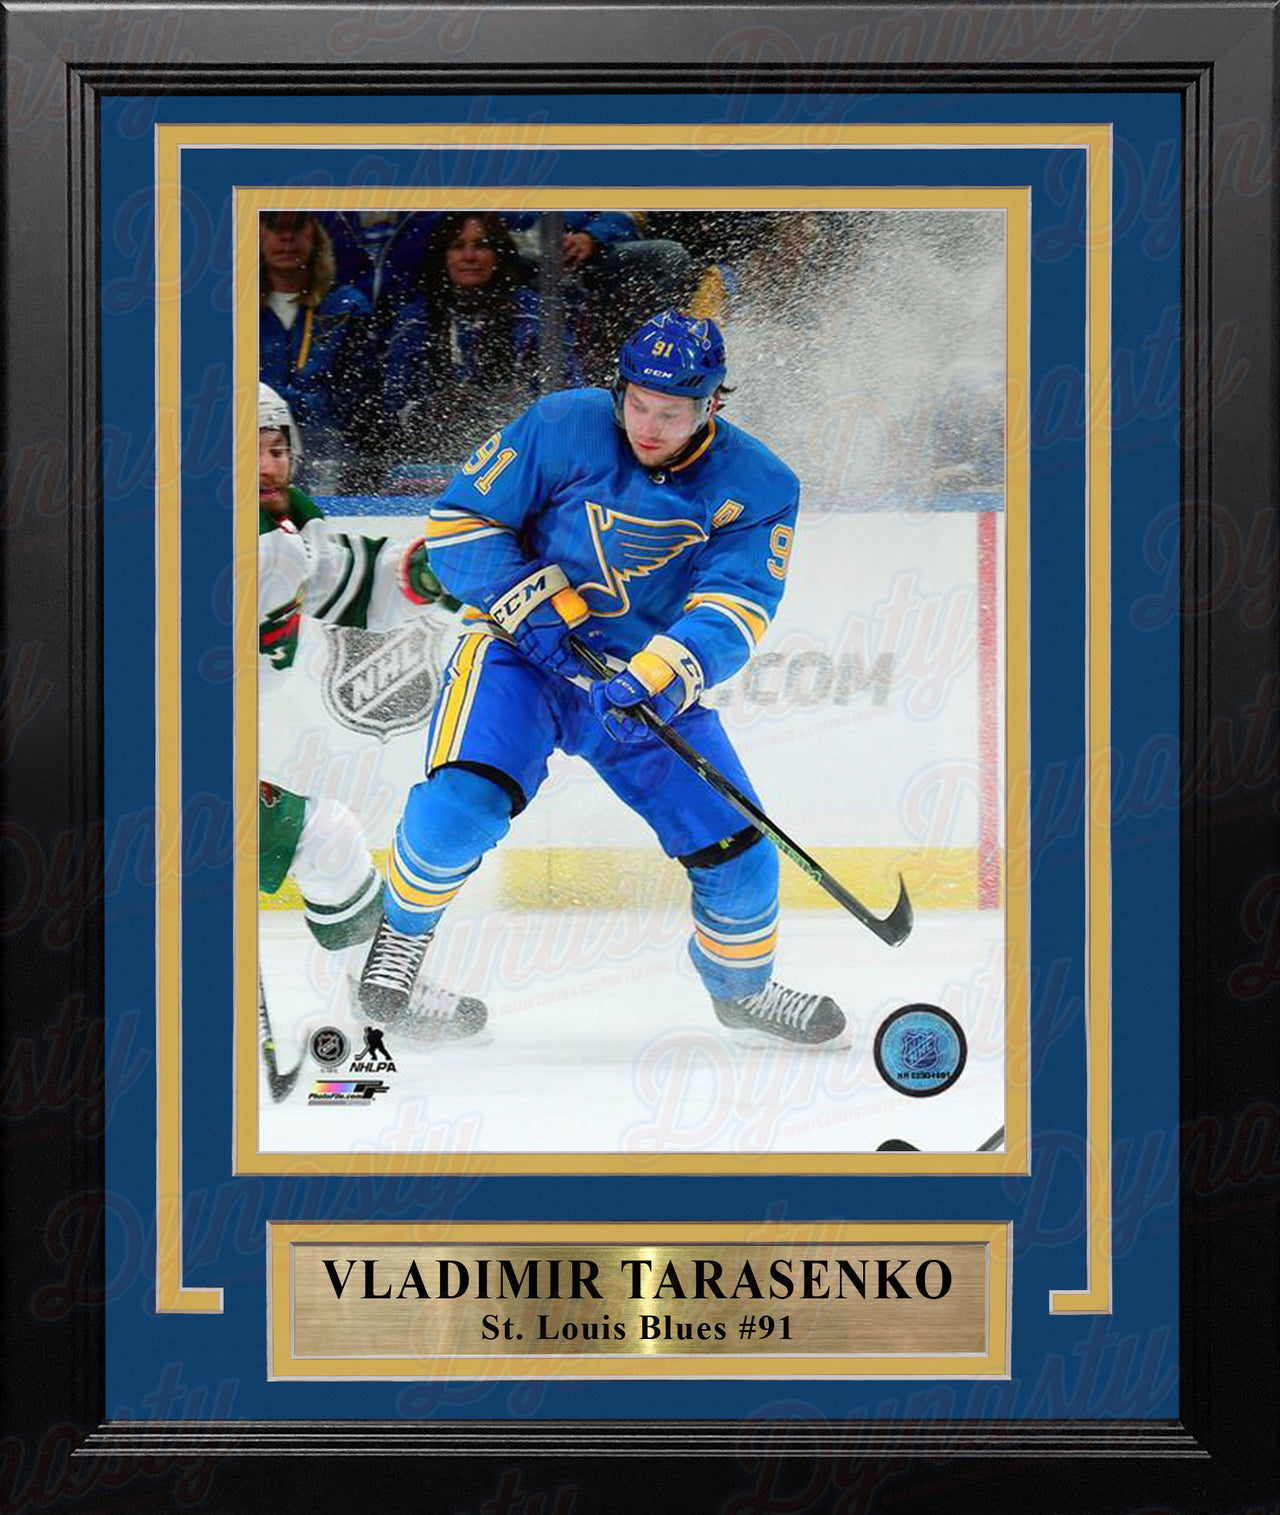 Vladimir Tarasenko St. Louis Blues in Action NHL Hockey 8" x 10" Framed and Matted Photo - Dynasty Sports & Framing 